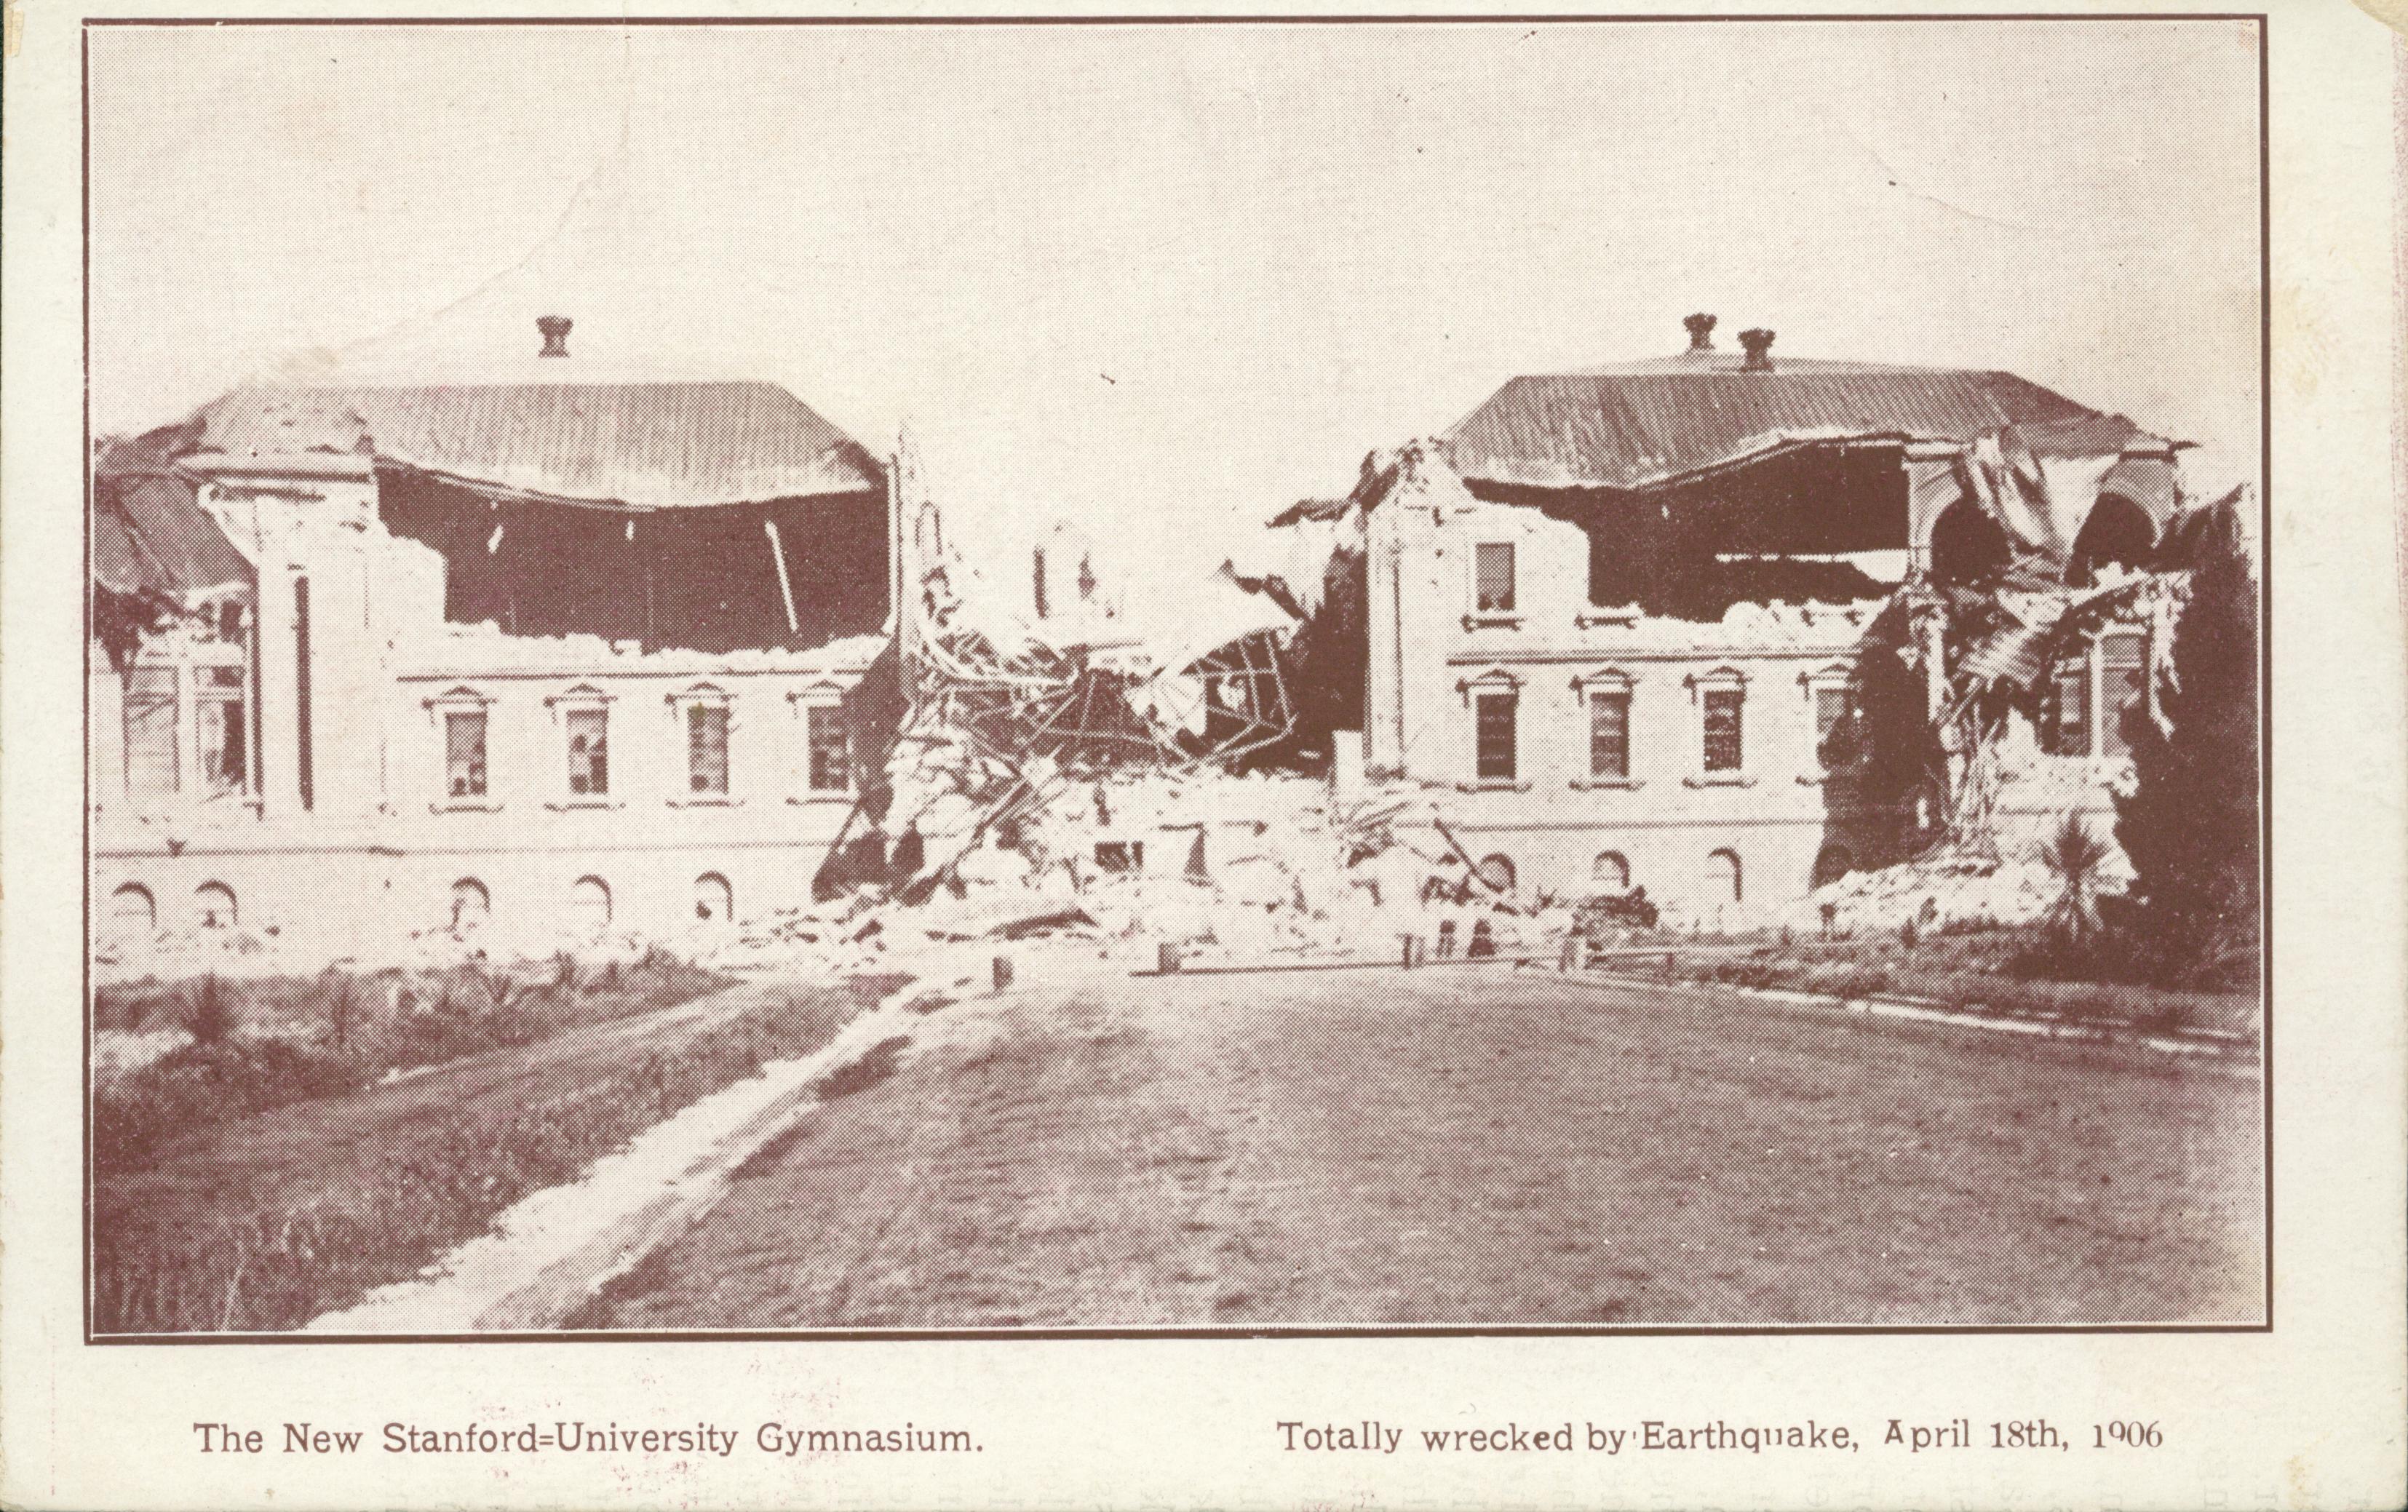 View of the destroyed university gymnasium after the 1906 earthquake